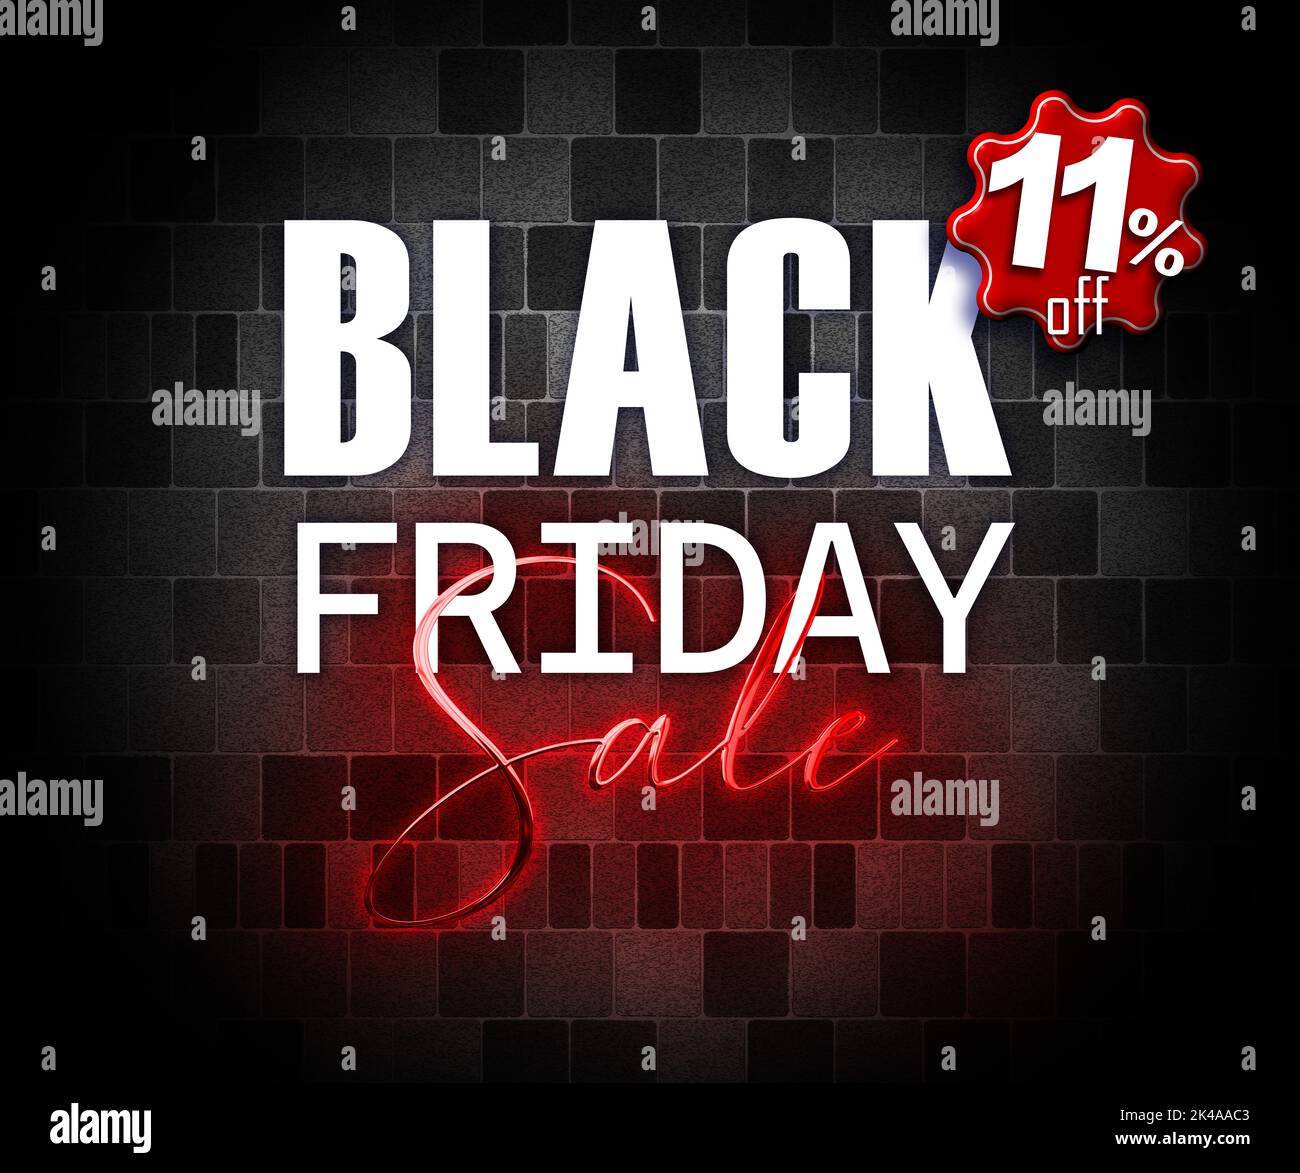 illustration with 3d elements black friday promotion banner 11 percent off sales increase Stock Photo